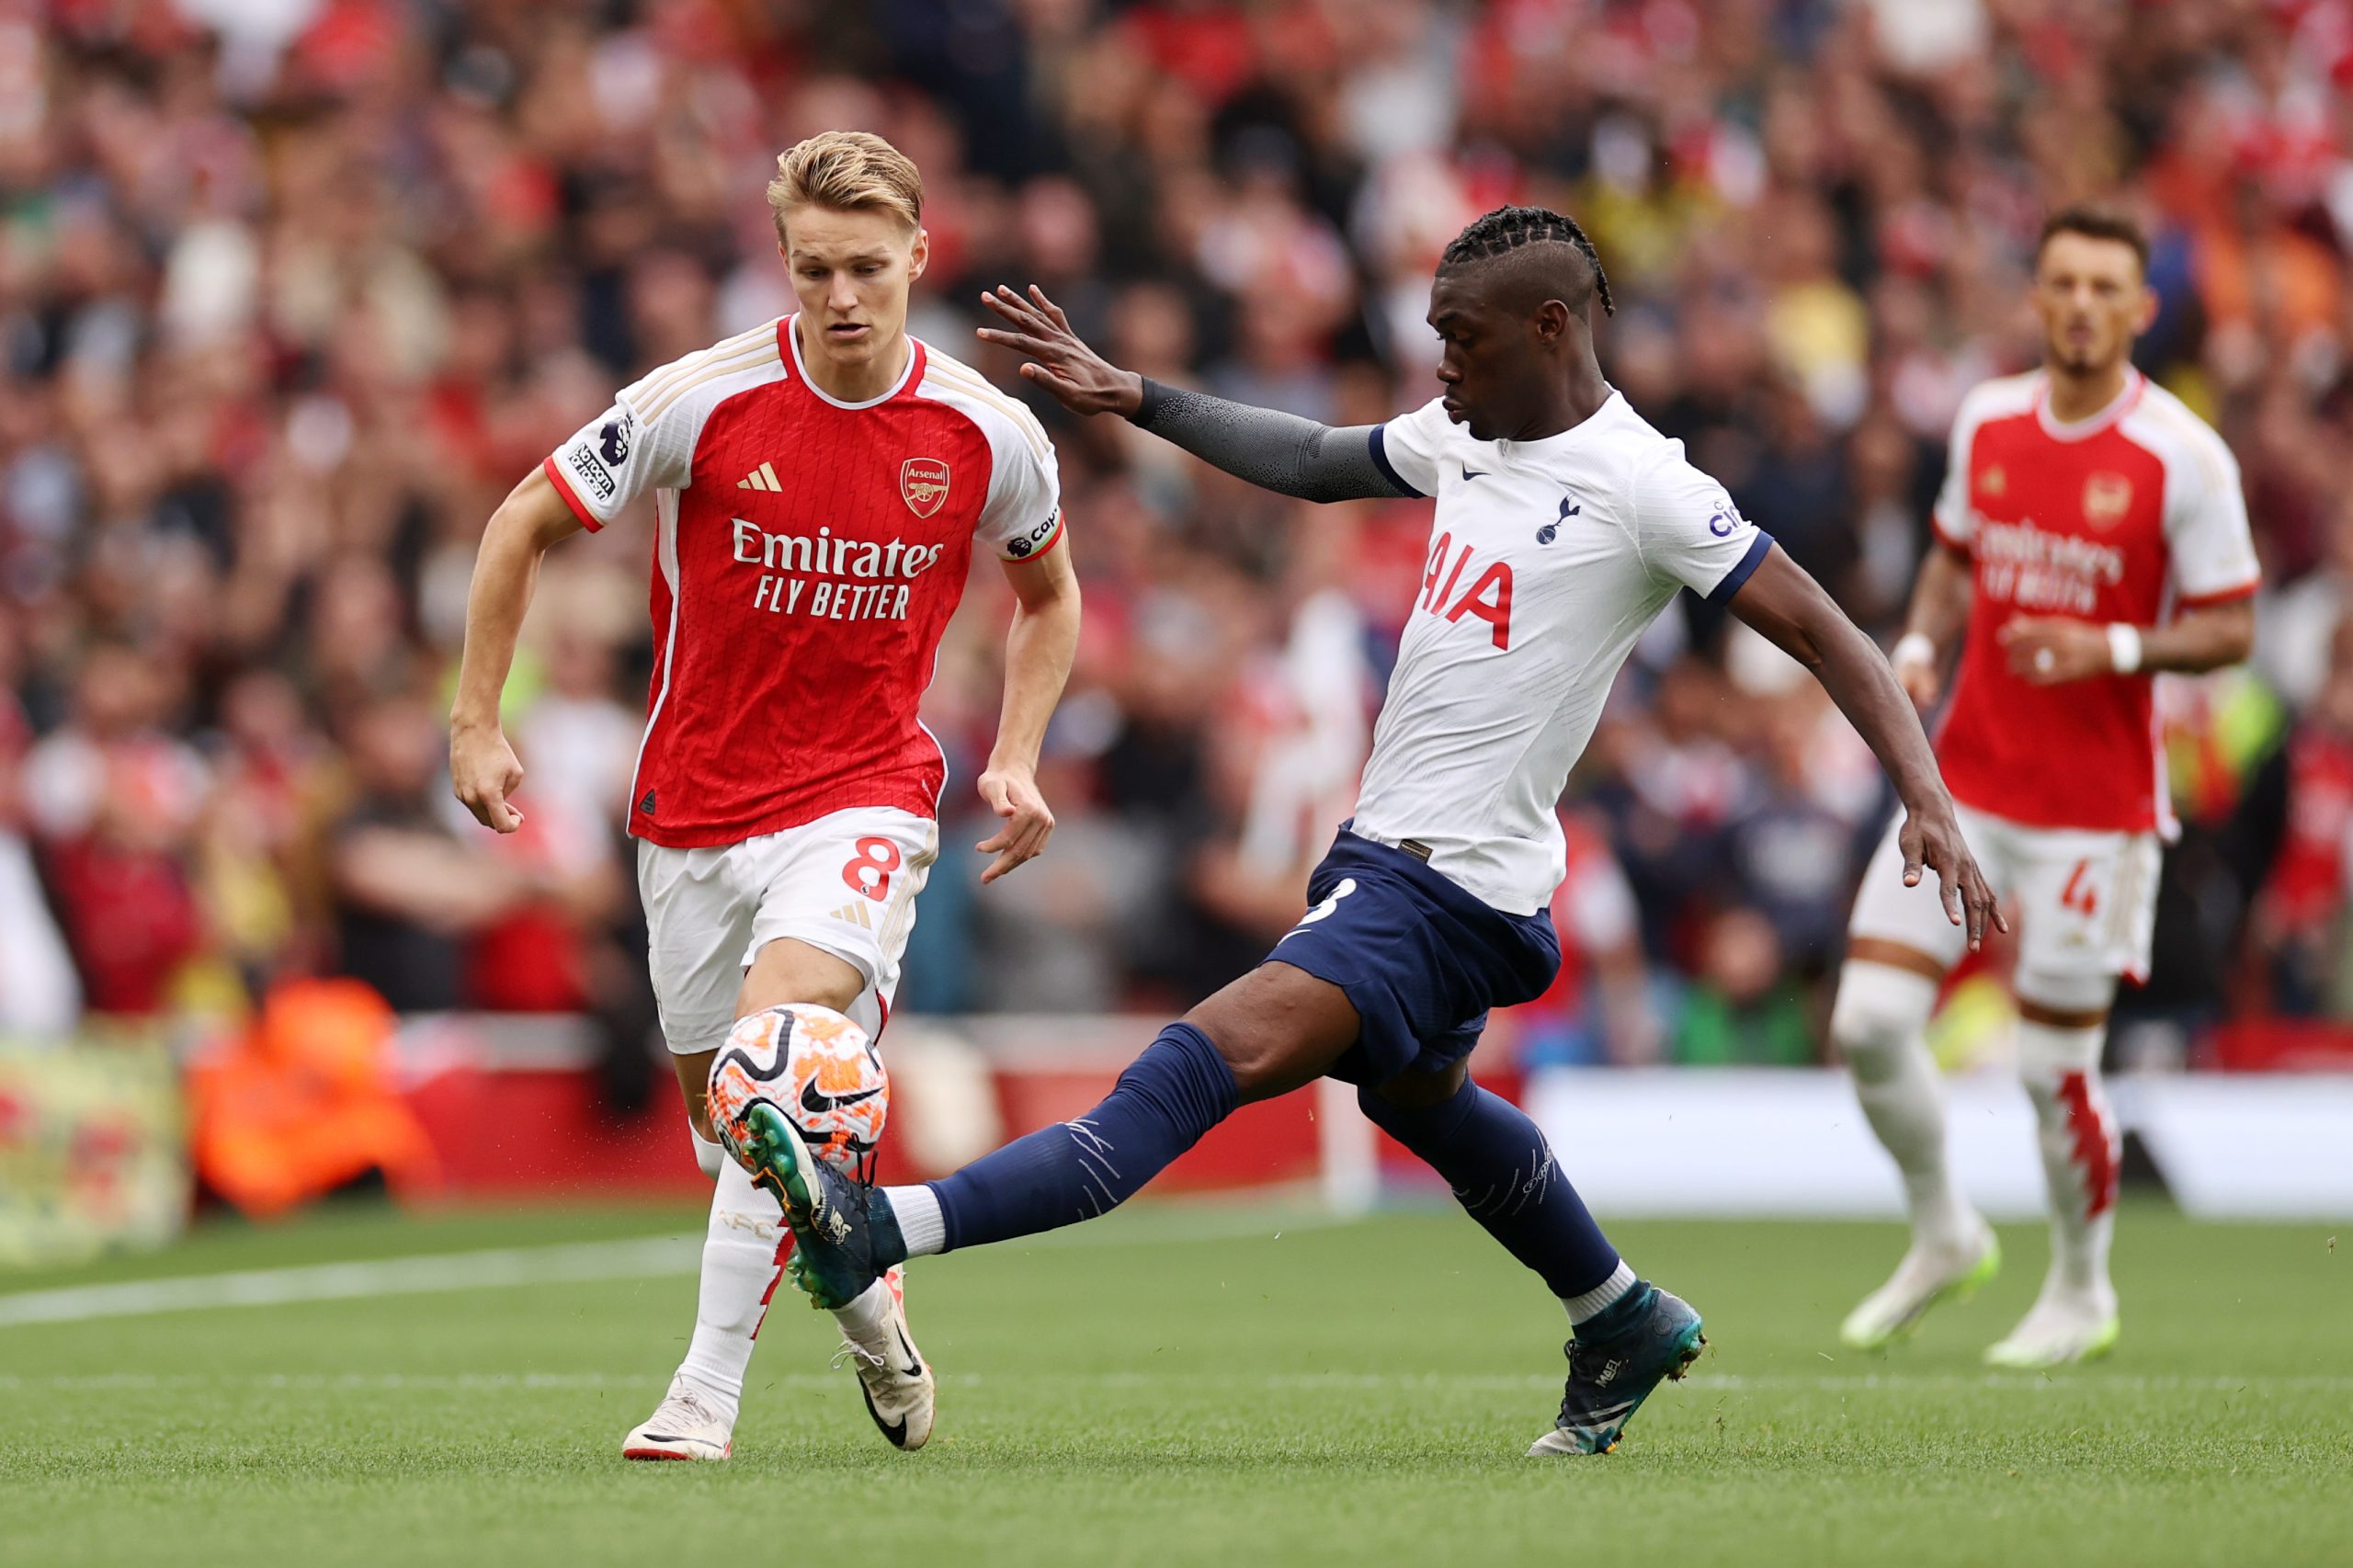 Tottenham loanee Eric Dier aims playful jab at Arsenal after knocking them out of the UCL.